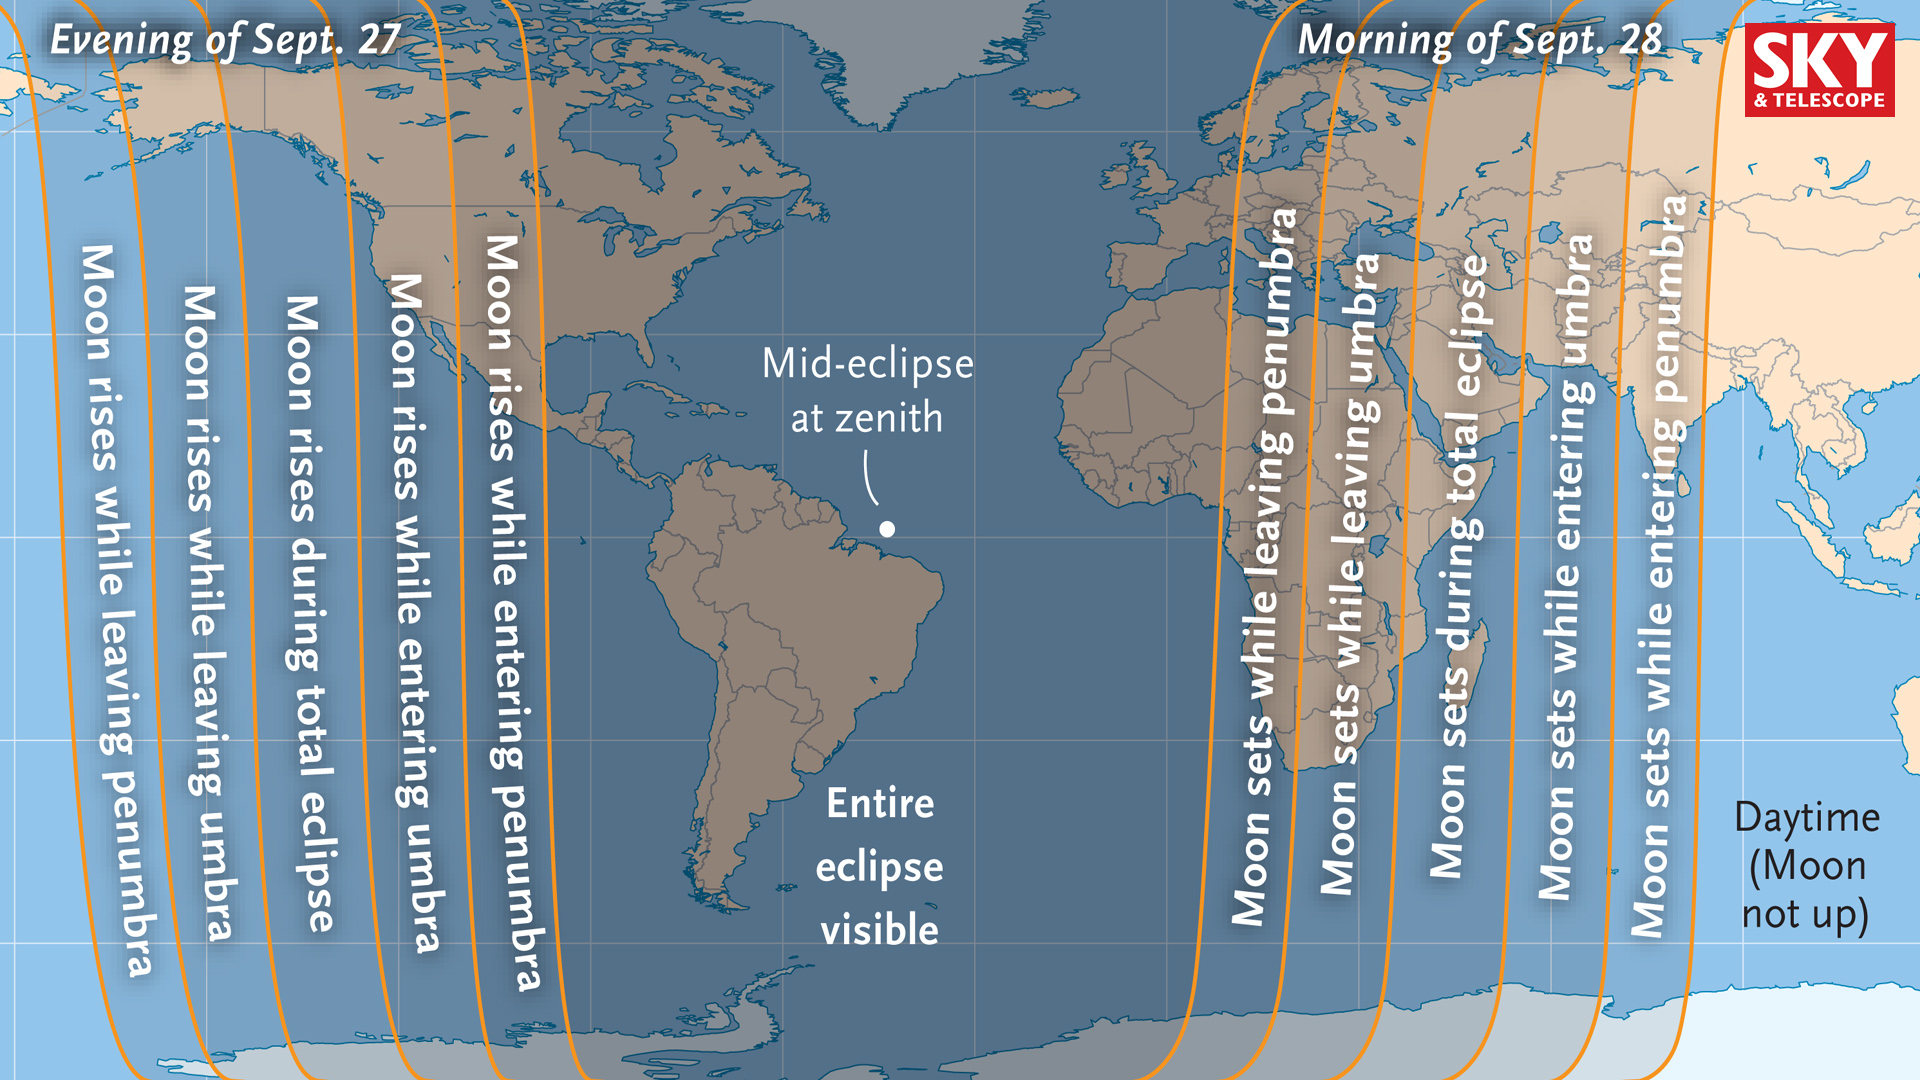 Who will see this month's total lunar eclipse?